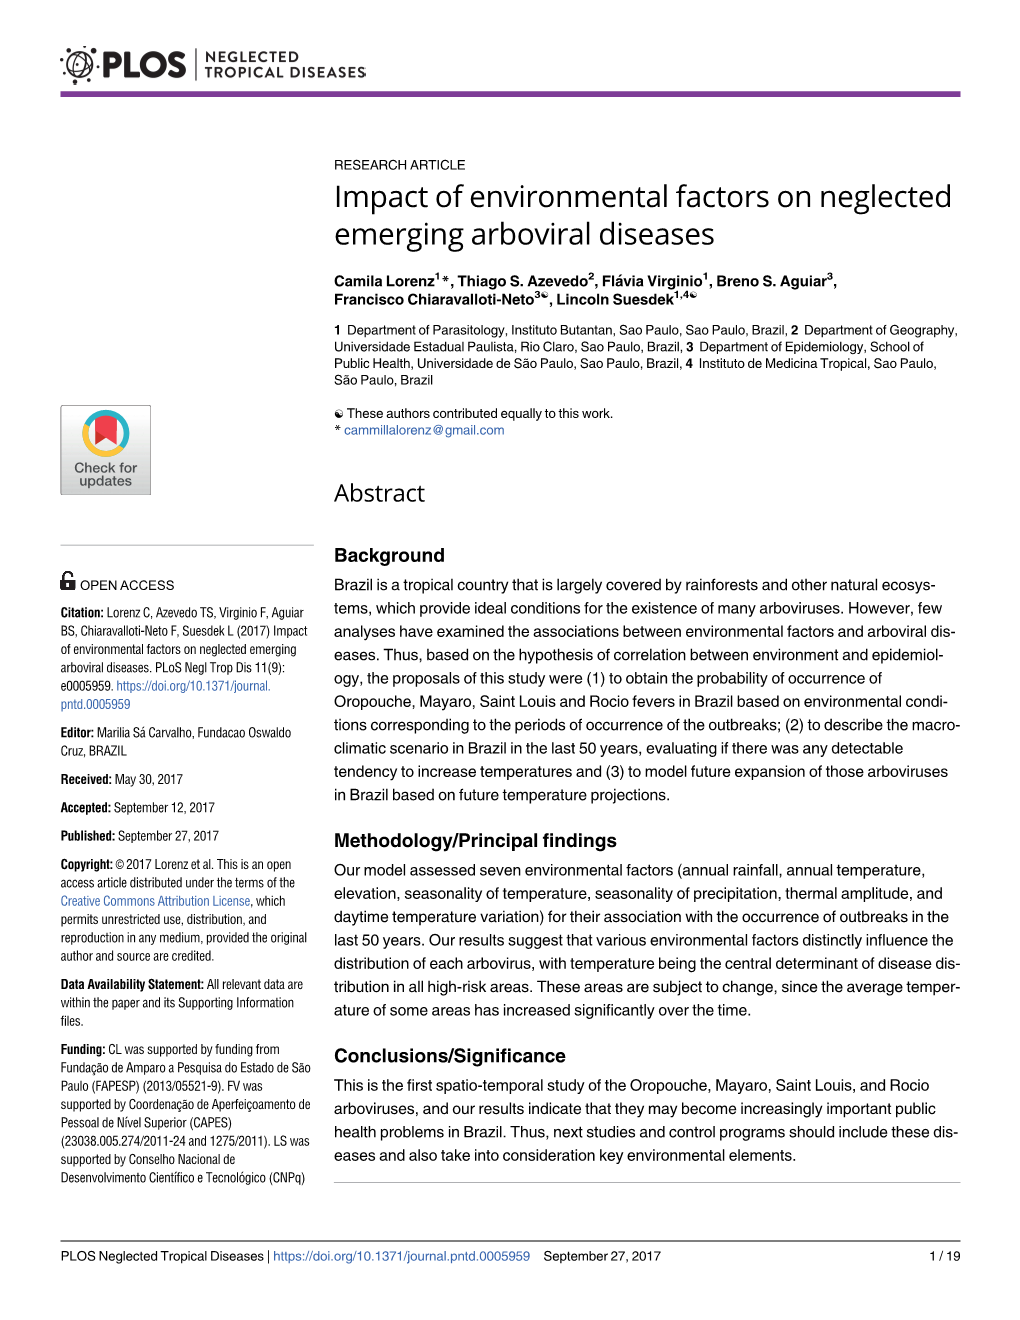 Impact of Environmental Factors on Neglected Emerging Arboviral Diseases